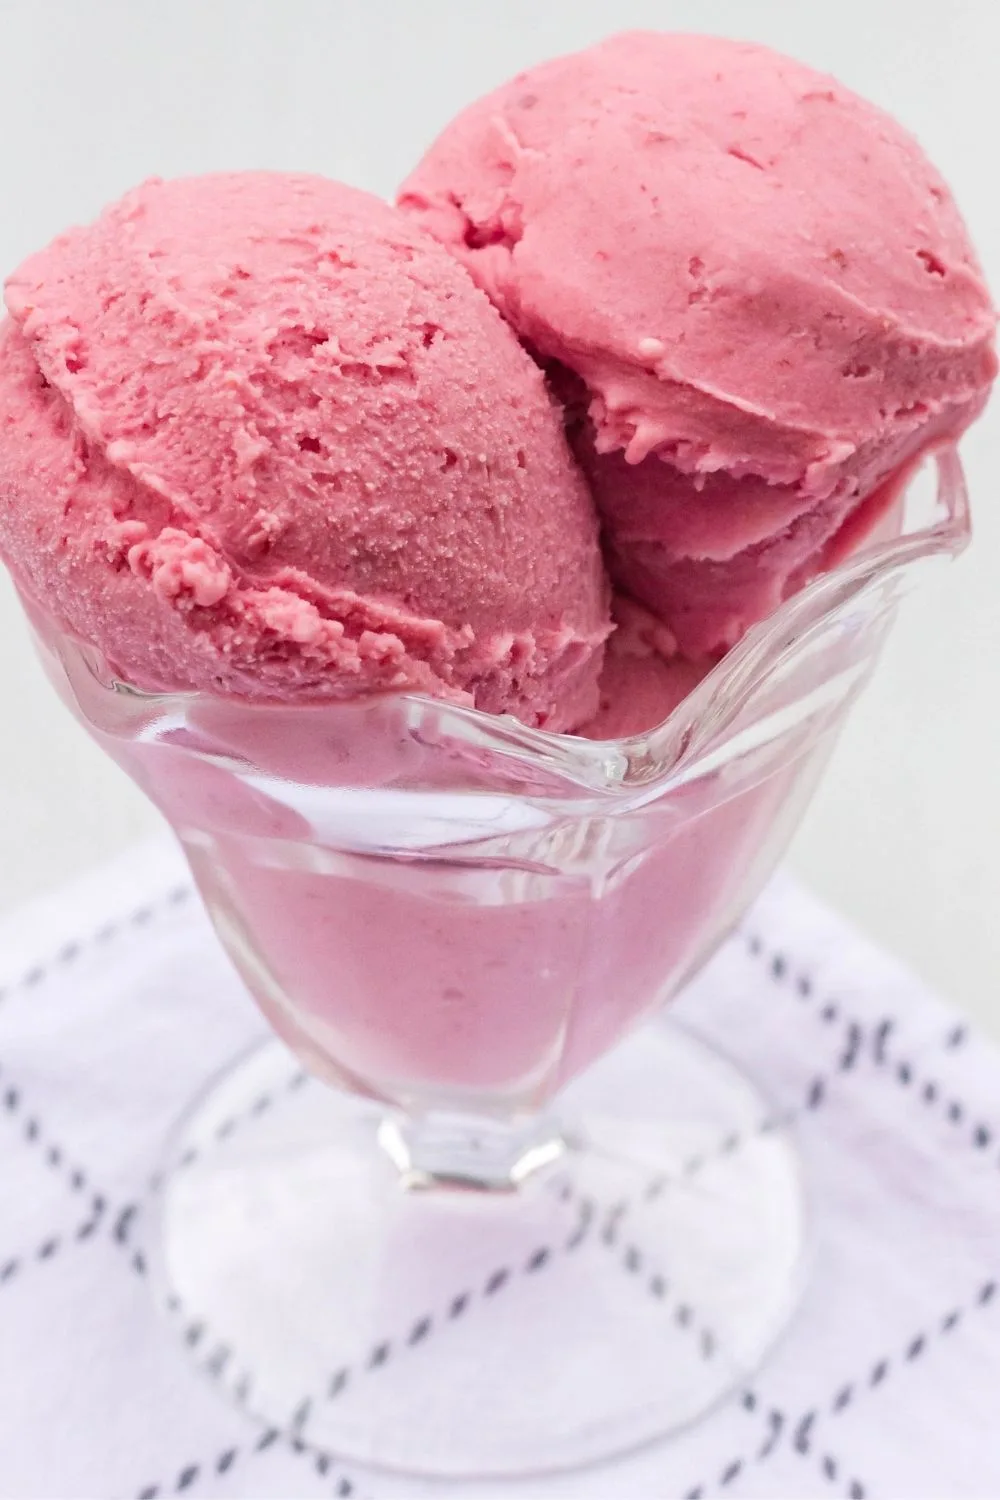 scoops of Ninja Creami cranberry ice cream served in a glass dessert cup